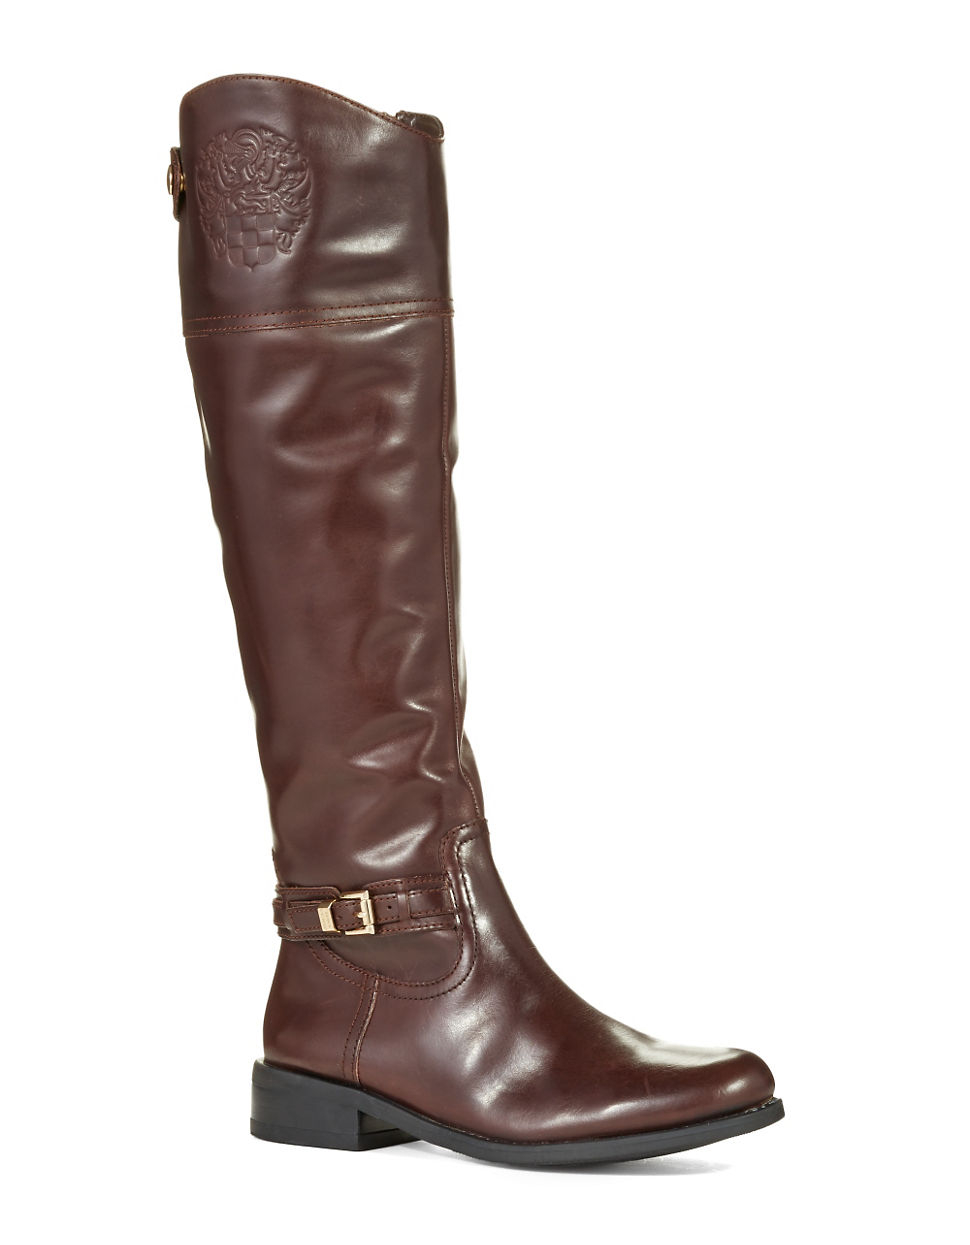 Vince camuto Kable Wide Calf Riding Boots in Brown | Lyst